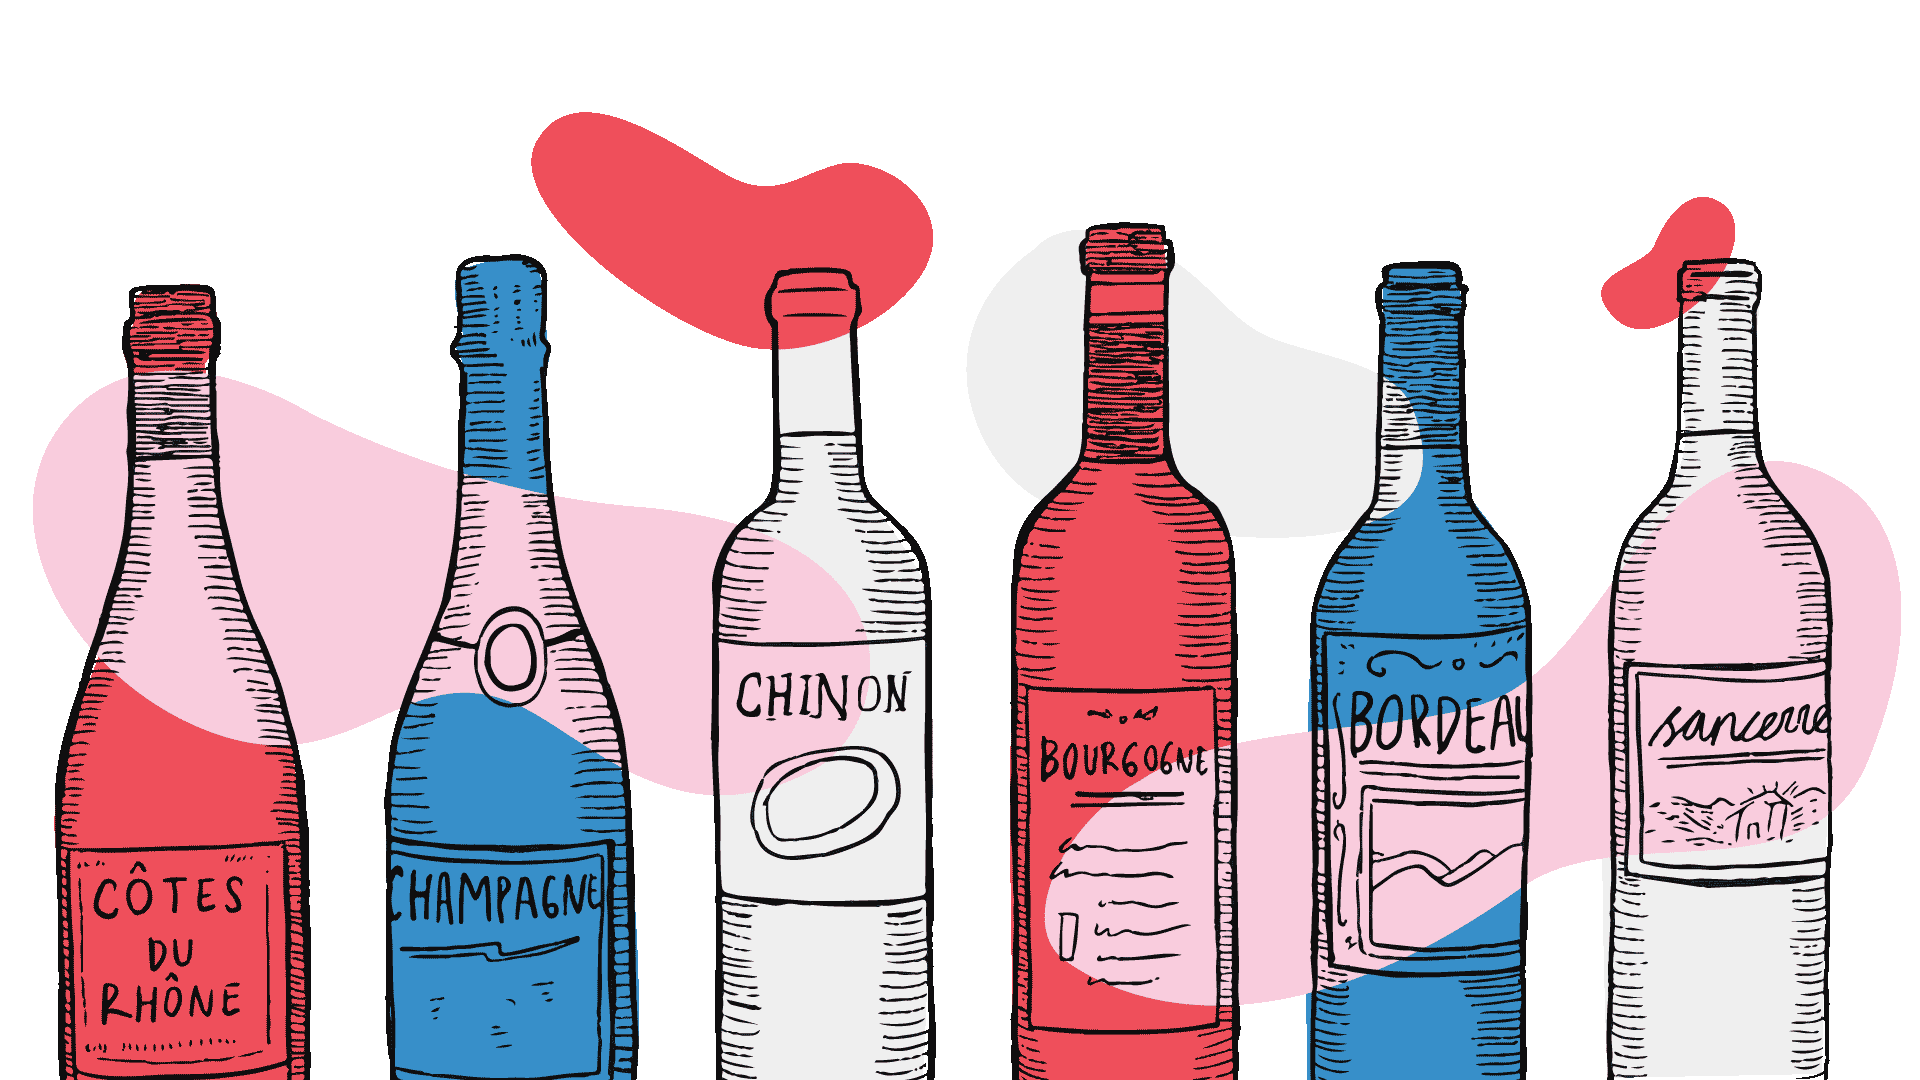 Create your own French wine selection